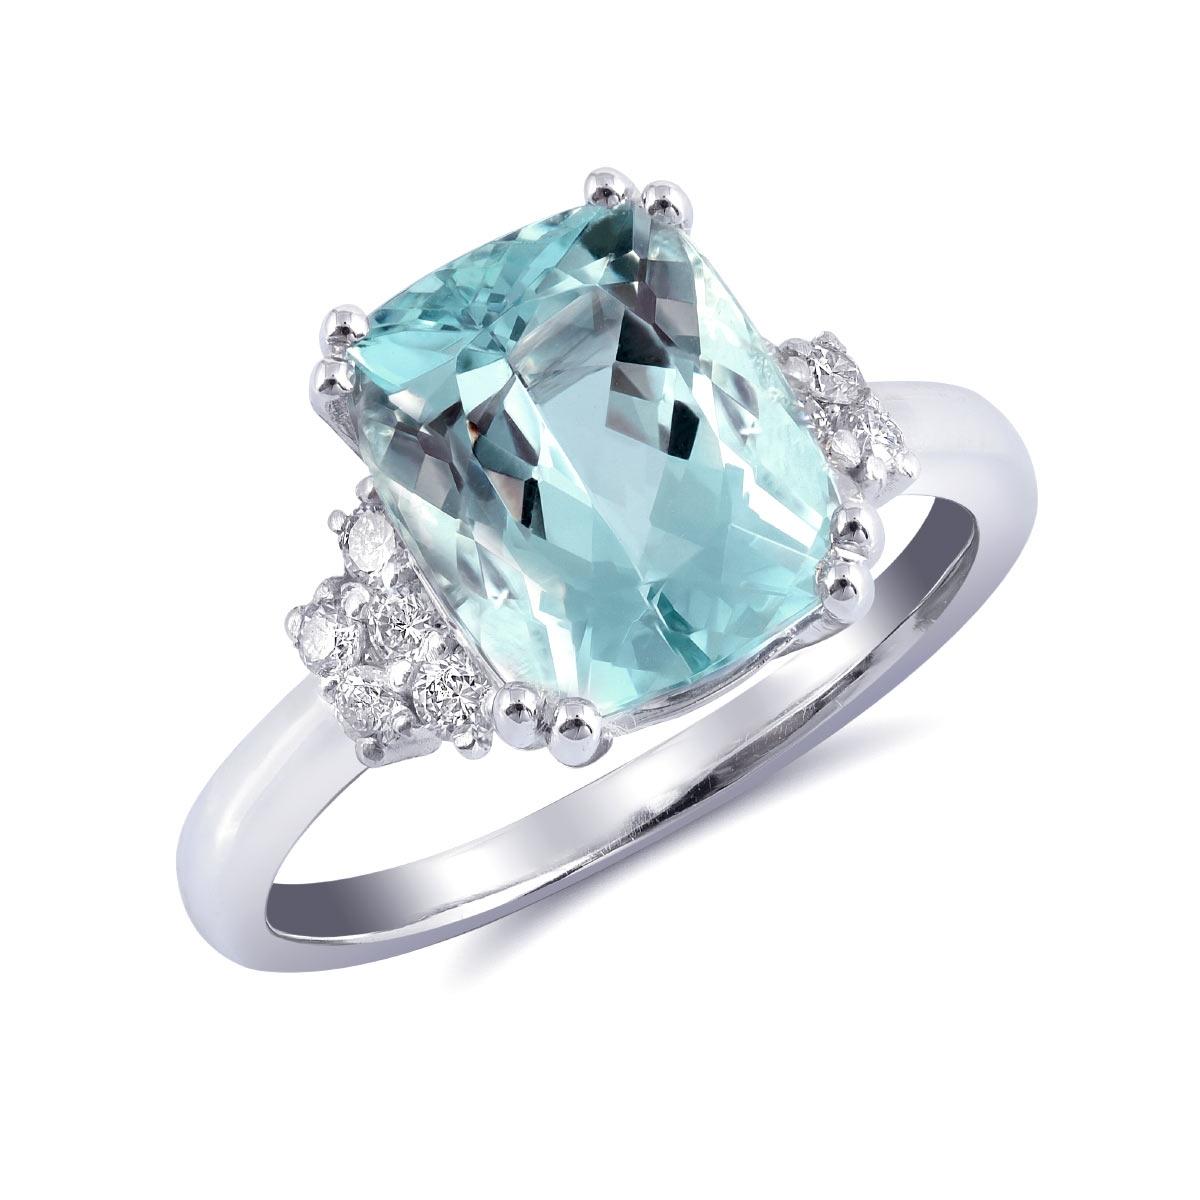 3.43 Carats Aquamarine Diamonds set in 14K White Gold Ring In New Condition For Sale In Los Angeles, CA